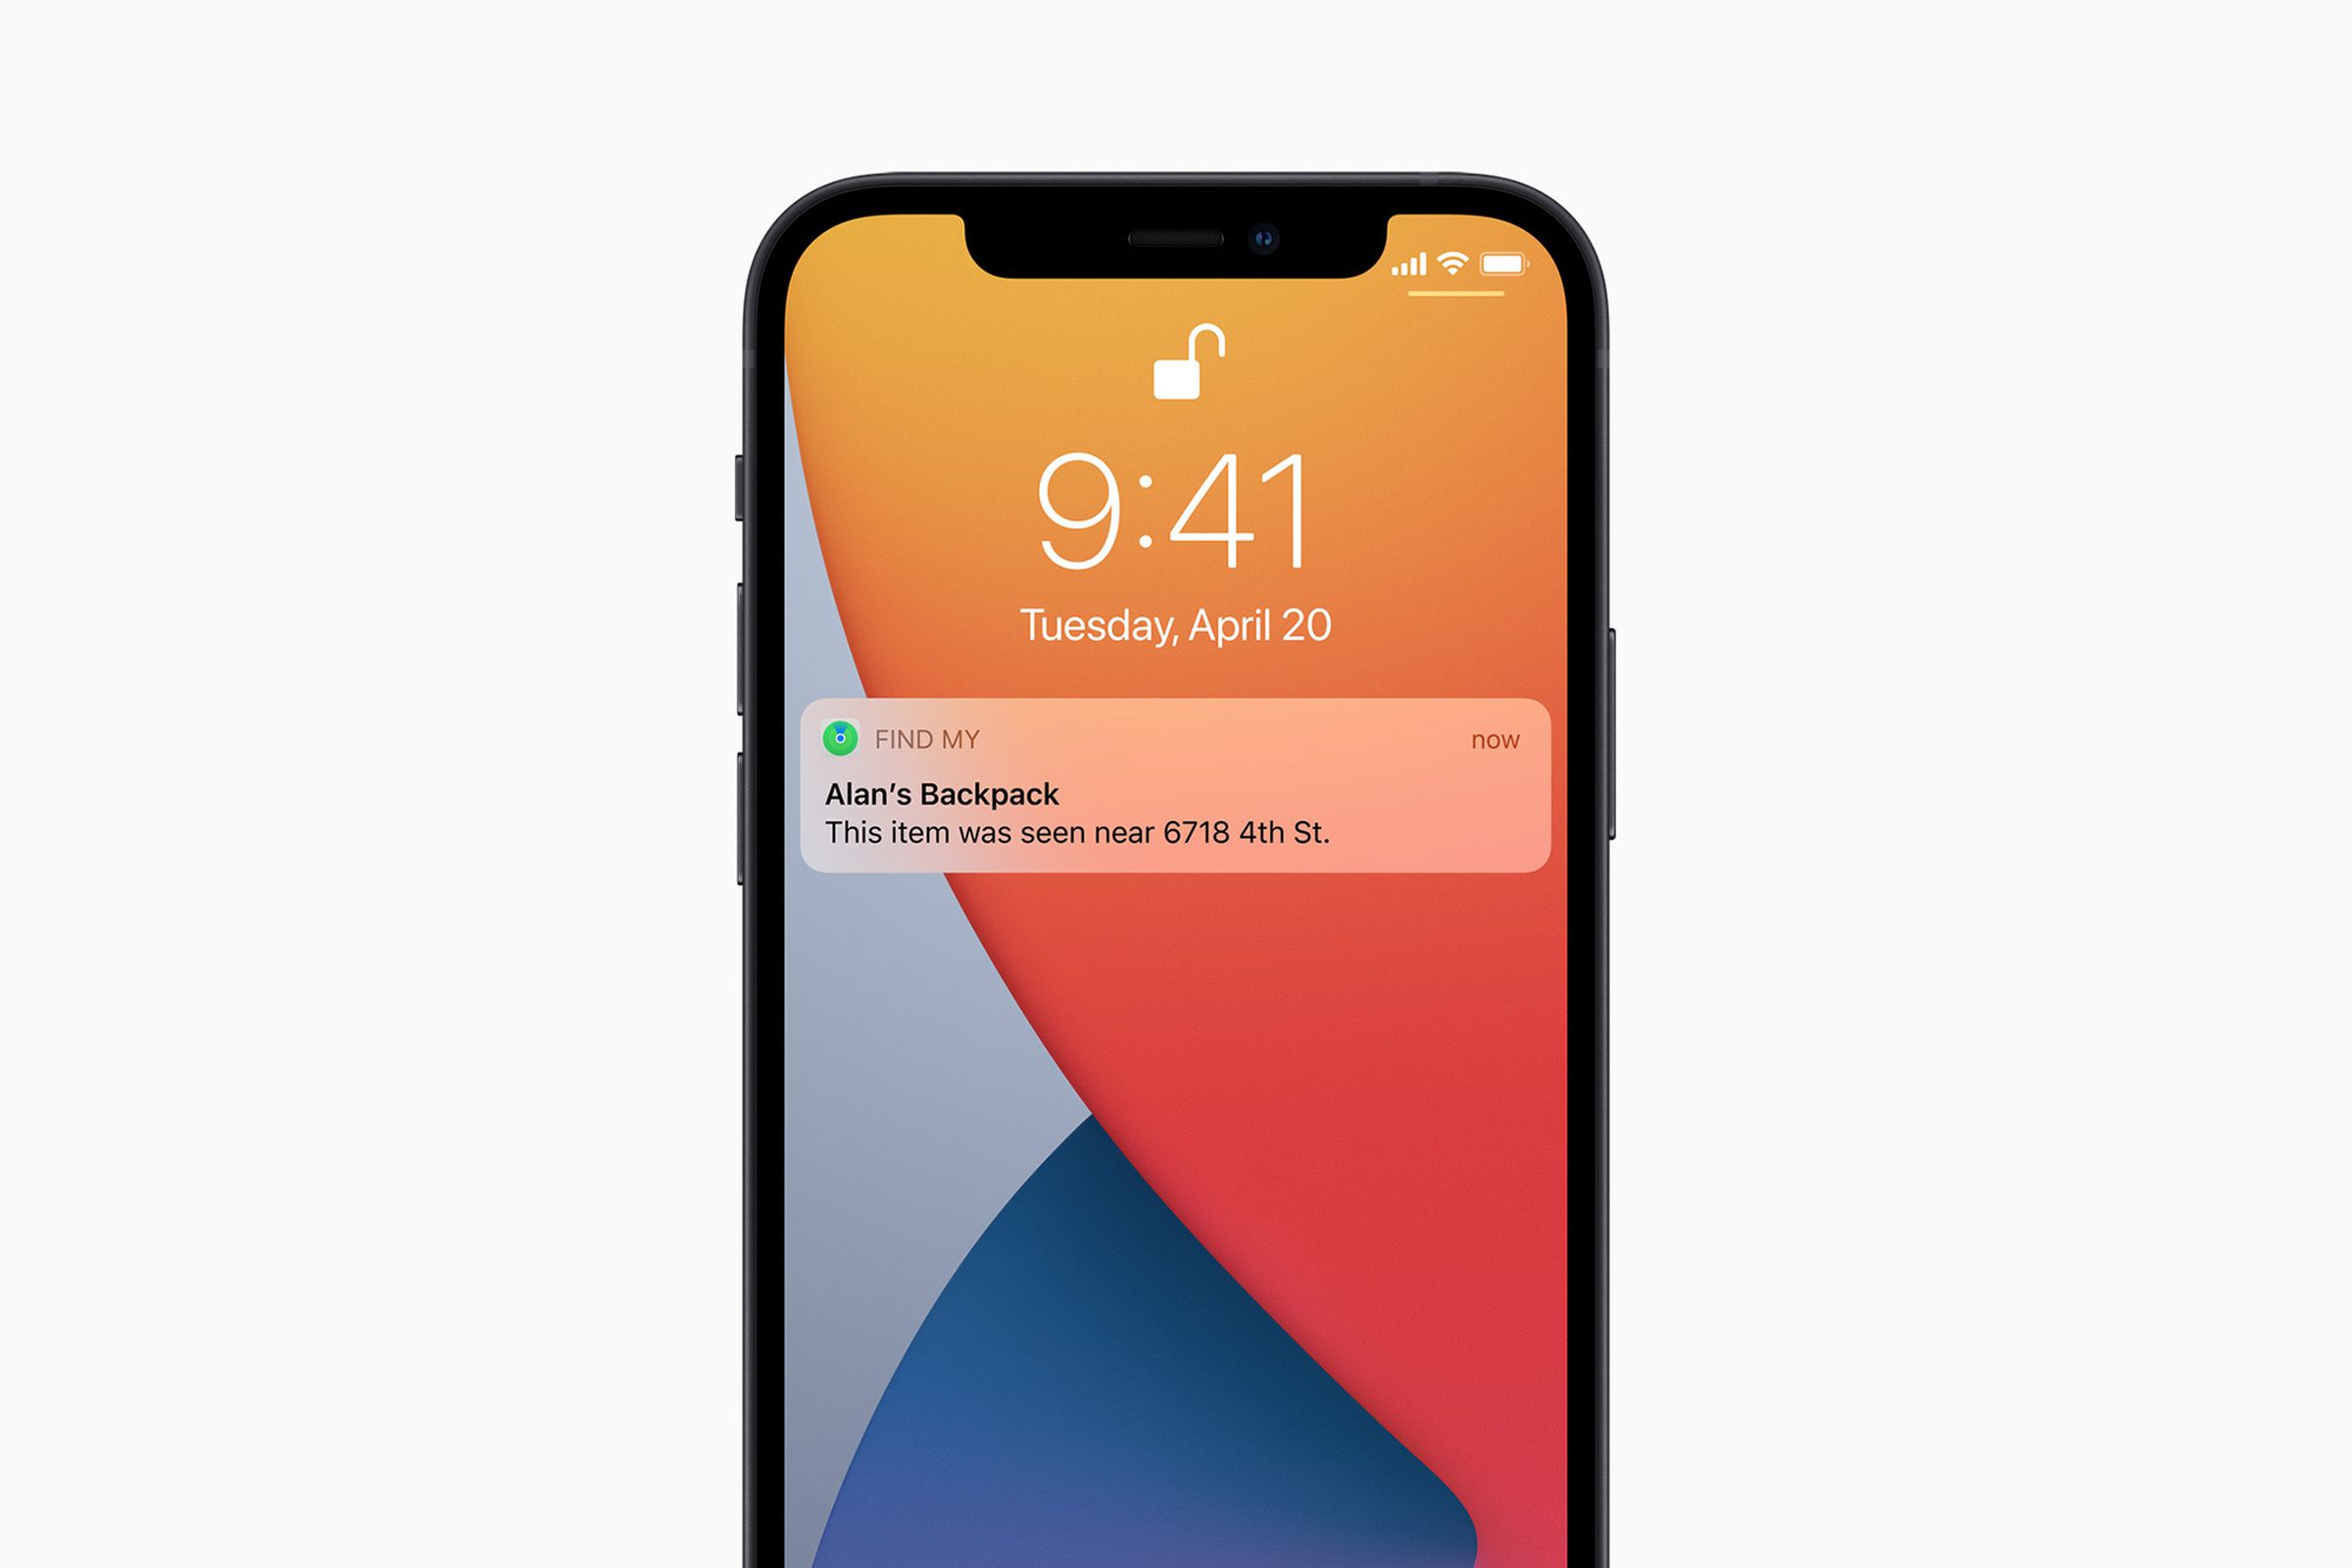 iOS 14.5 will enable use of AirTag trackers to help locate tagged items using Apple’s Find My feature.